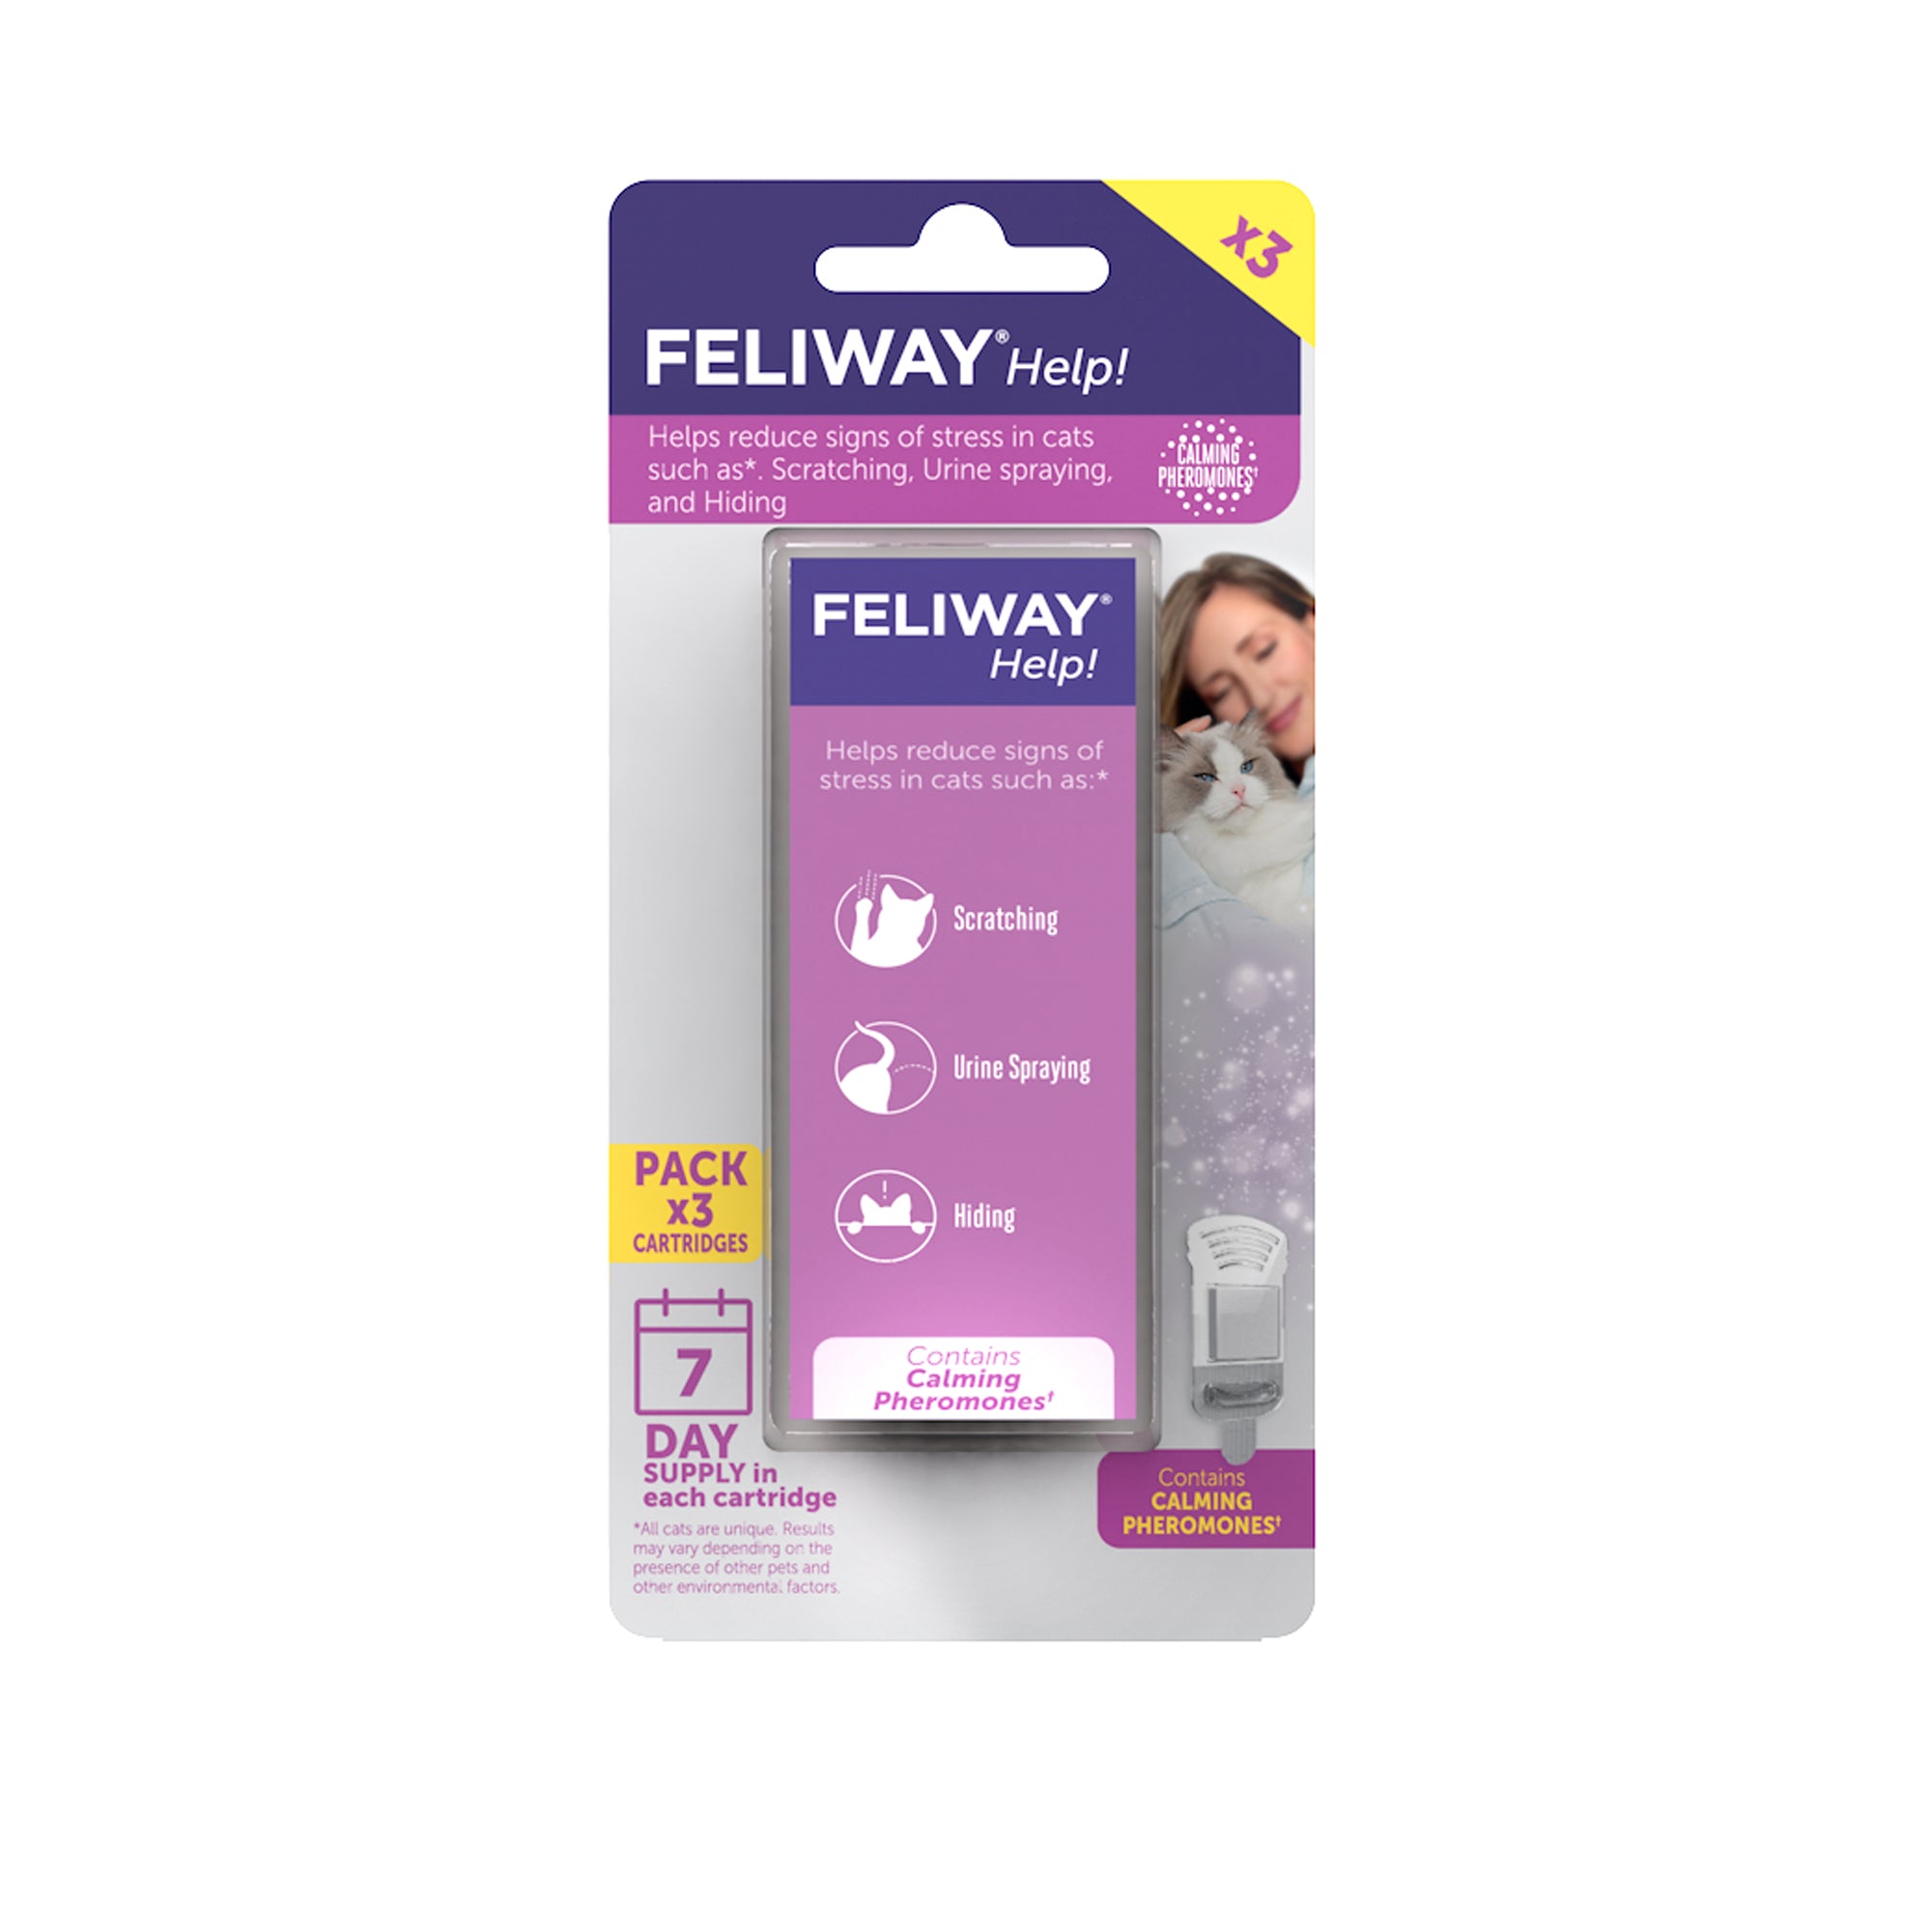 3 PACK FELIWAY CLASSIC Refill for Cats (144 mL), On Sale